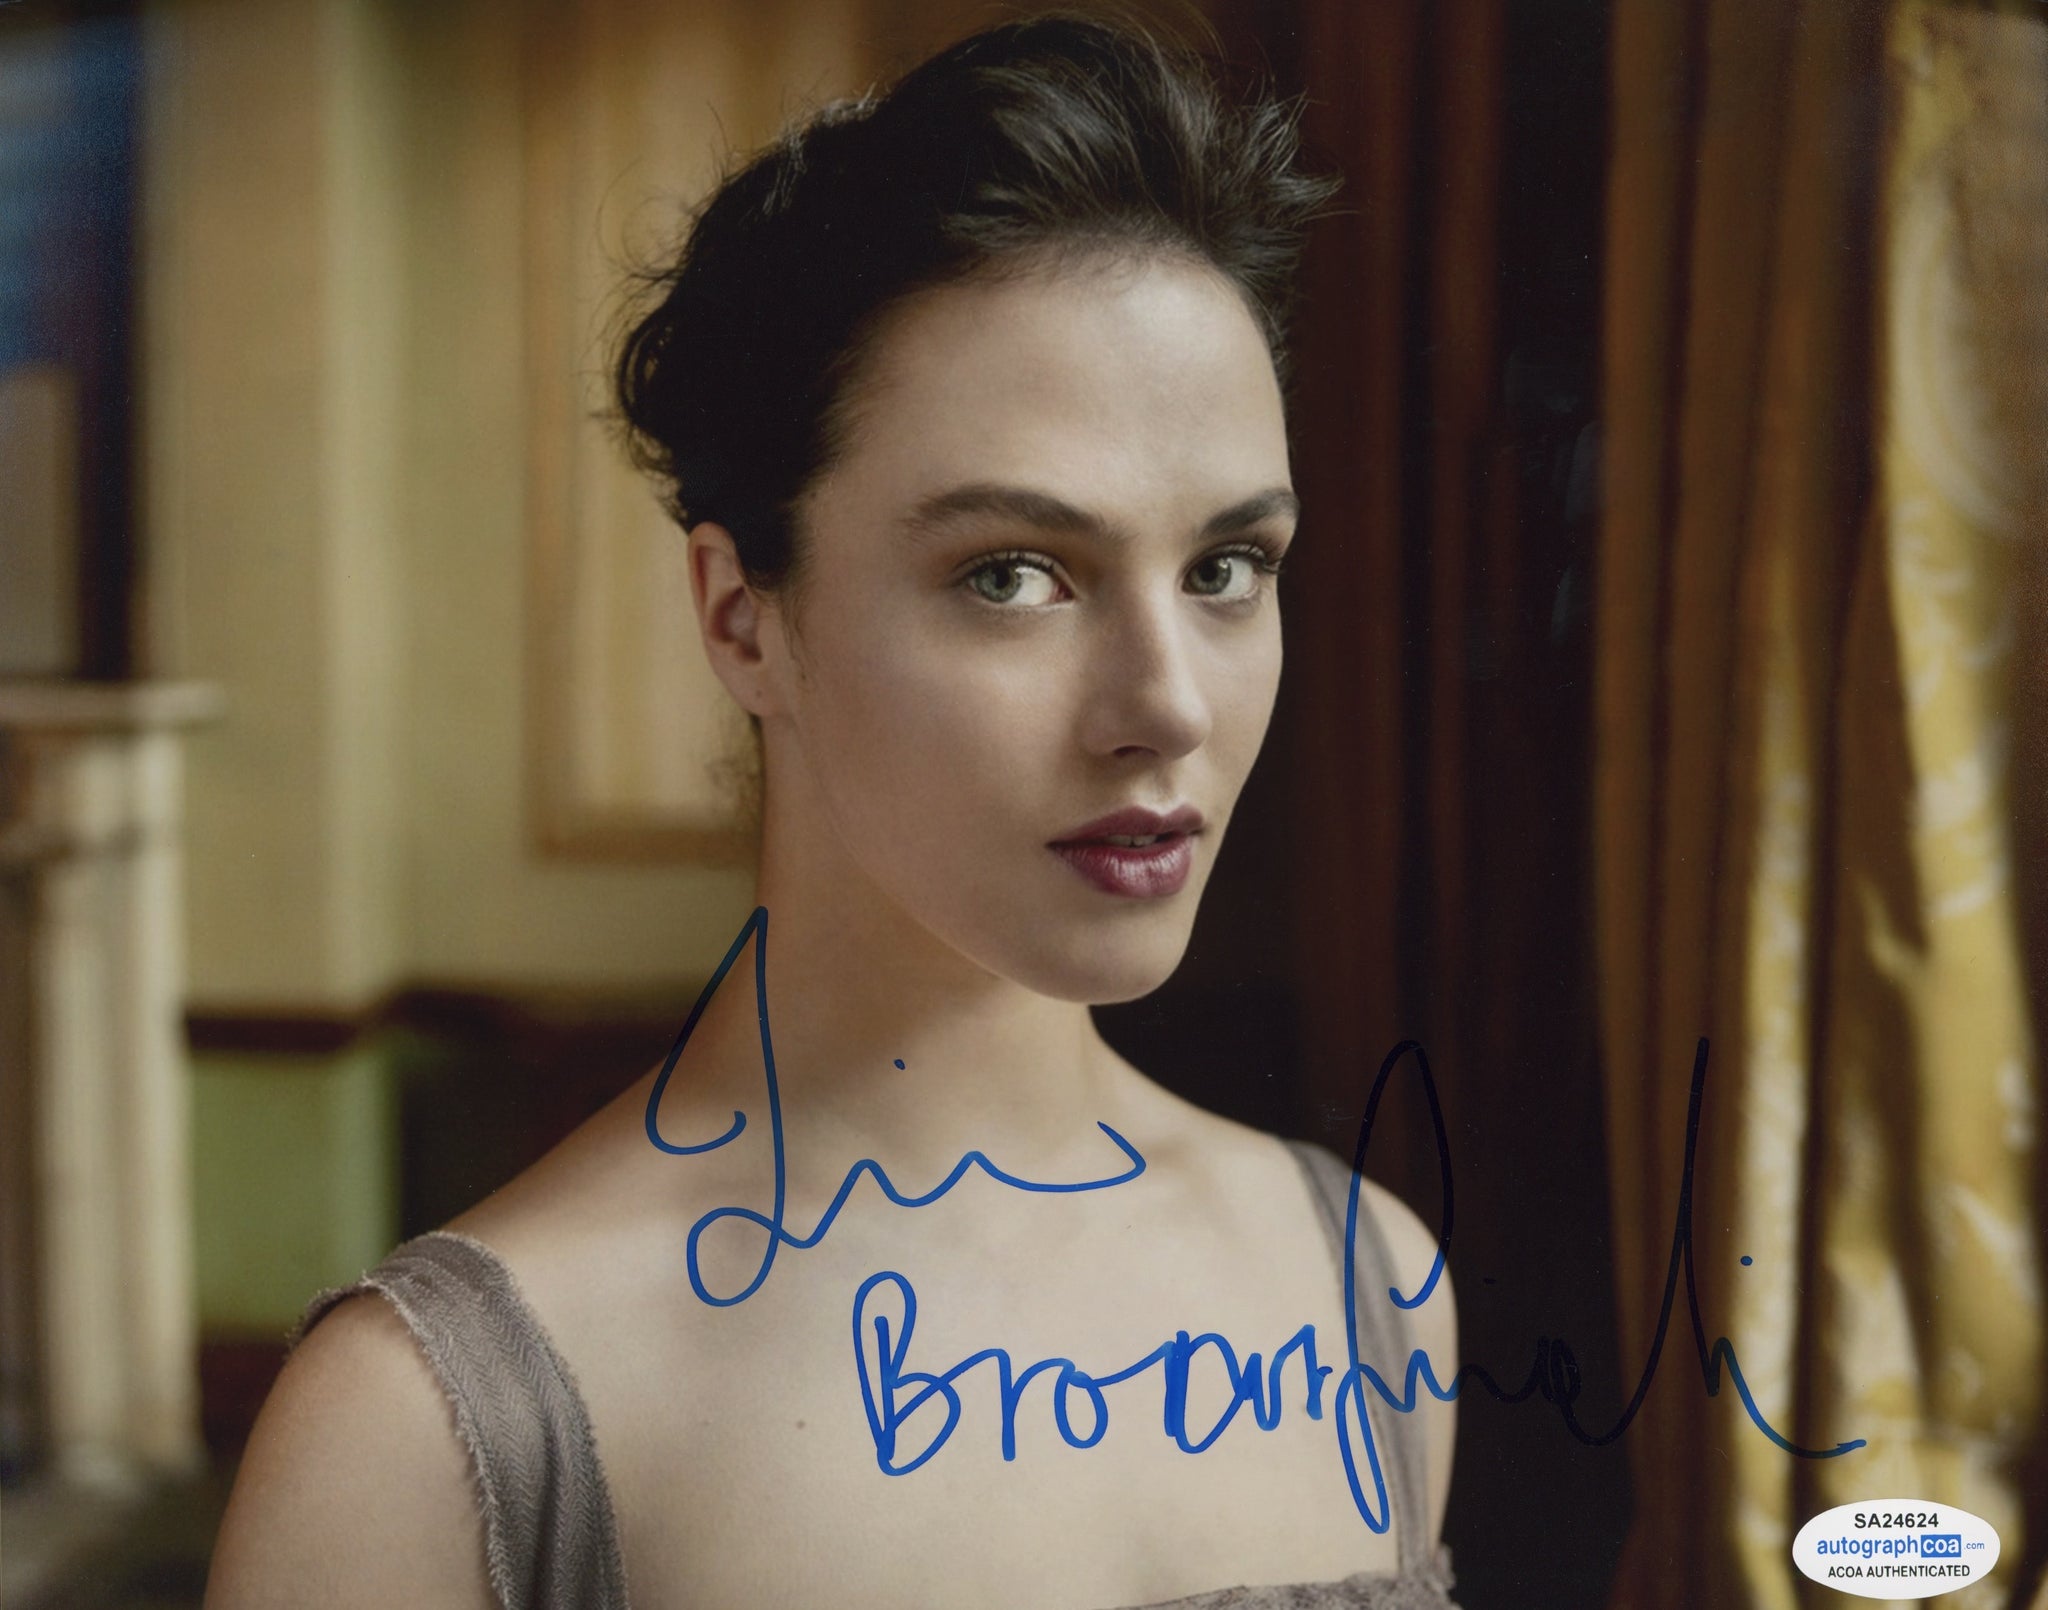 Jessica Brown Findlay Sexy Signed Autograph 8x10 Photo ACOA  #8 - Outlaw Hobbies Authentic Autographs